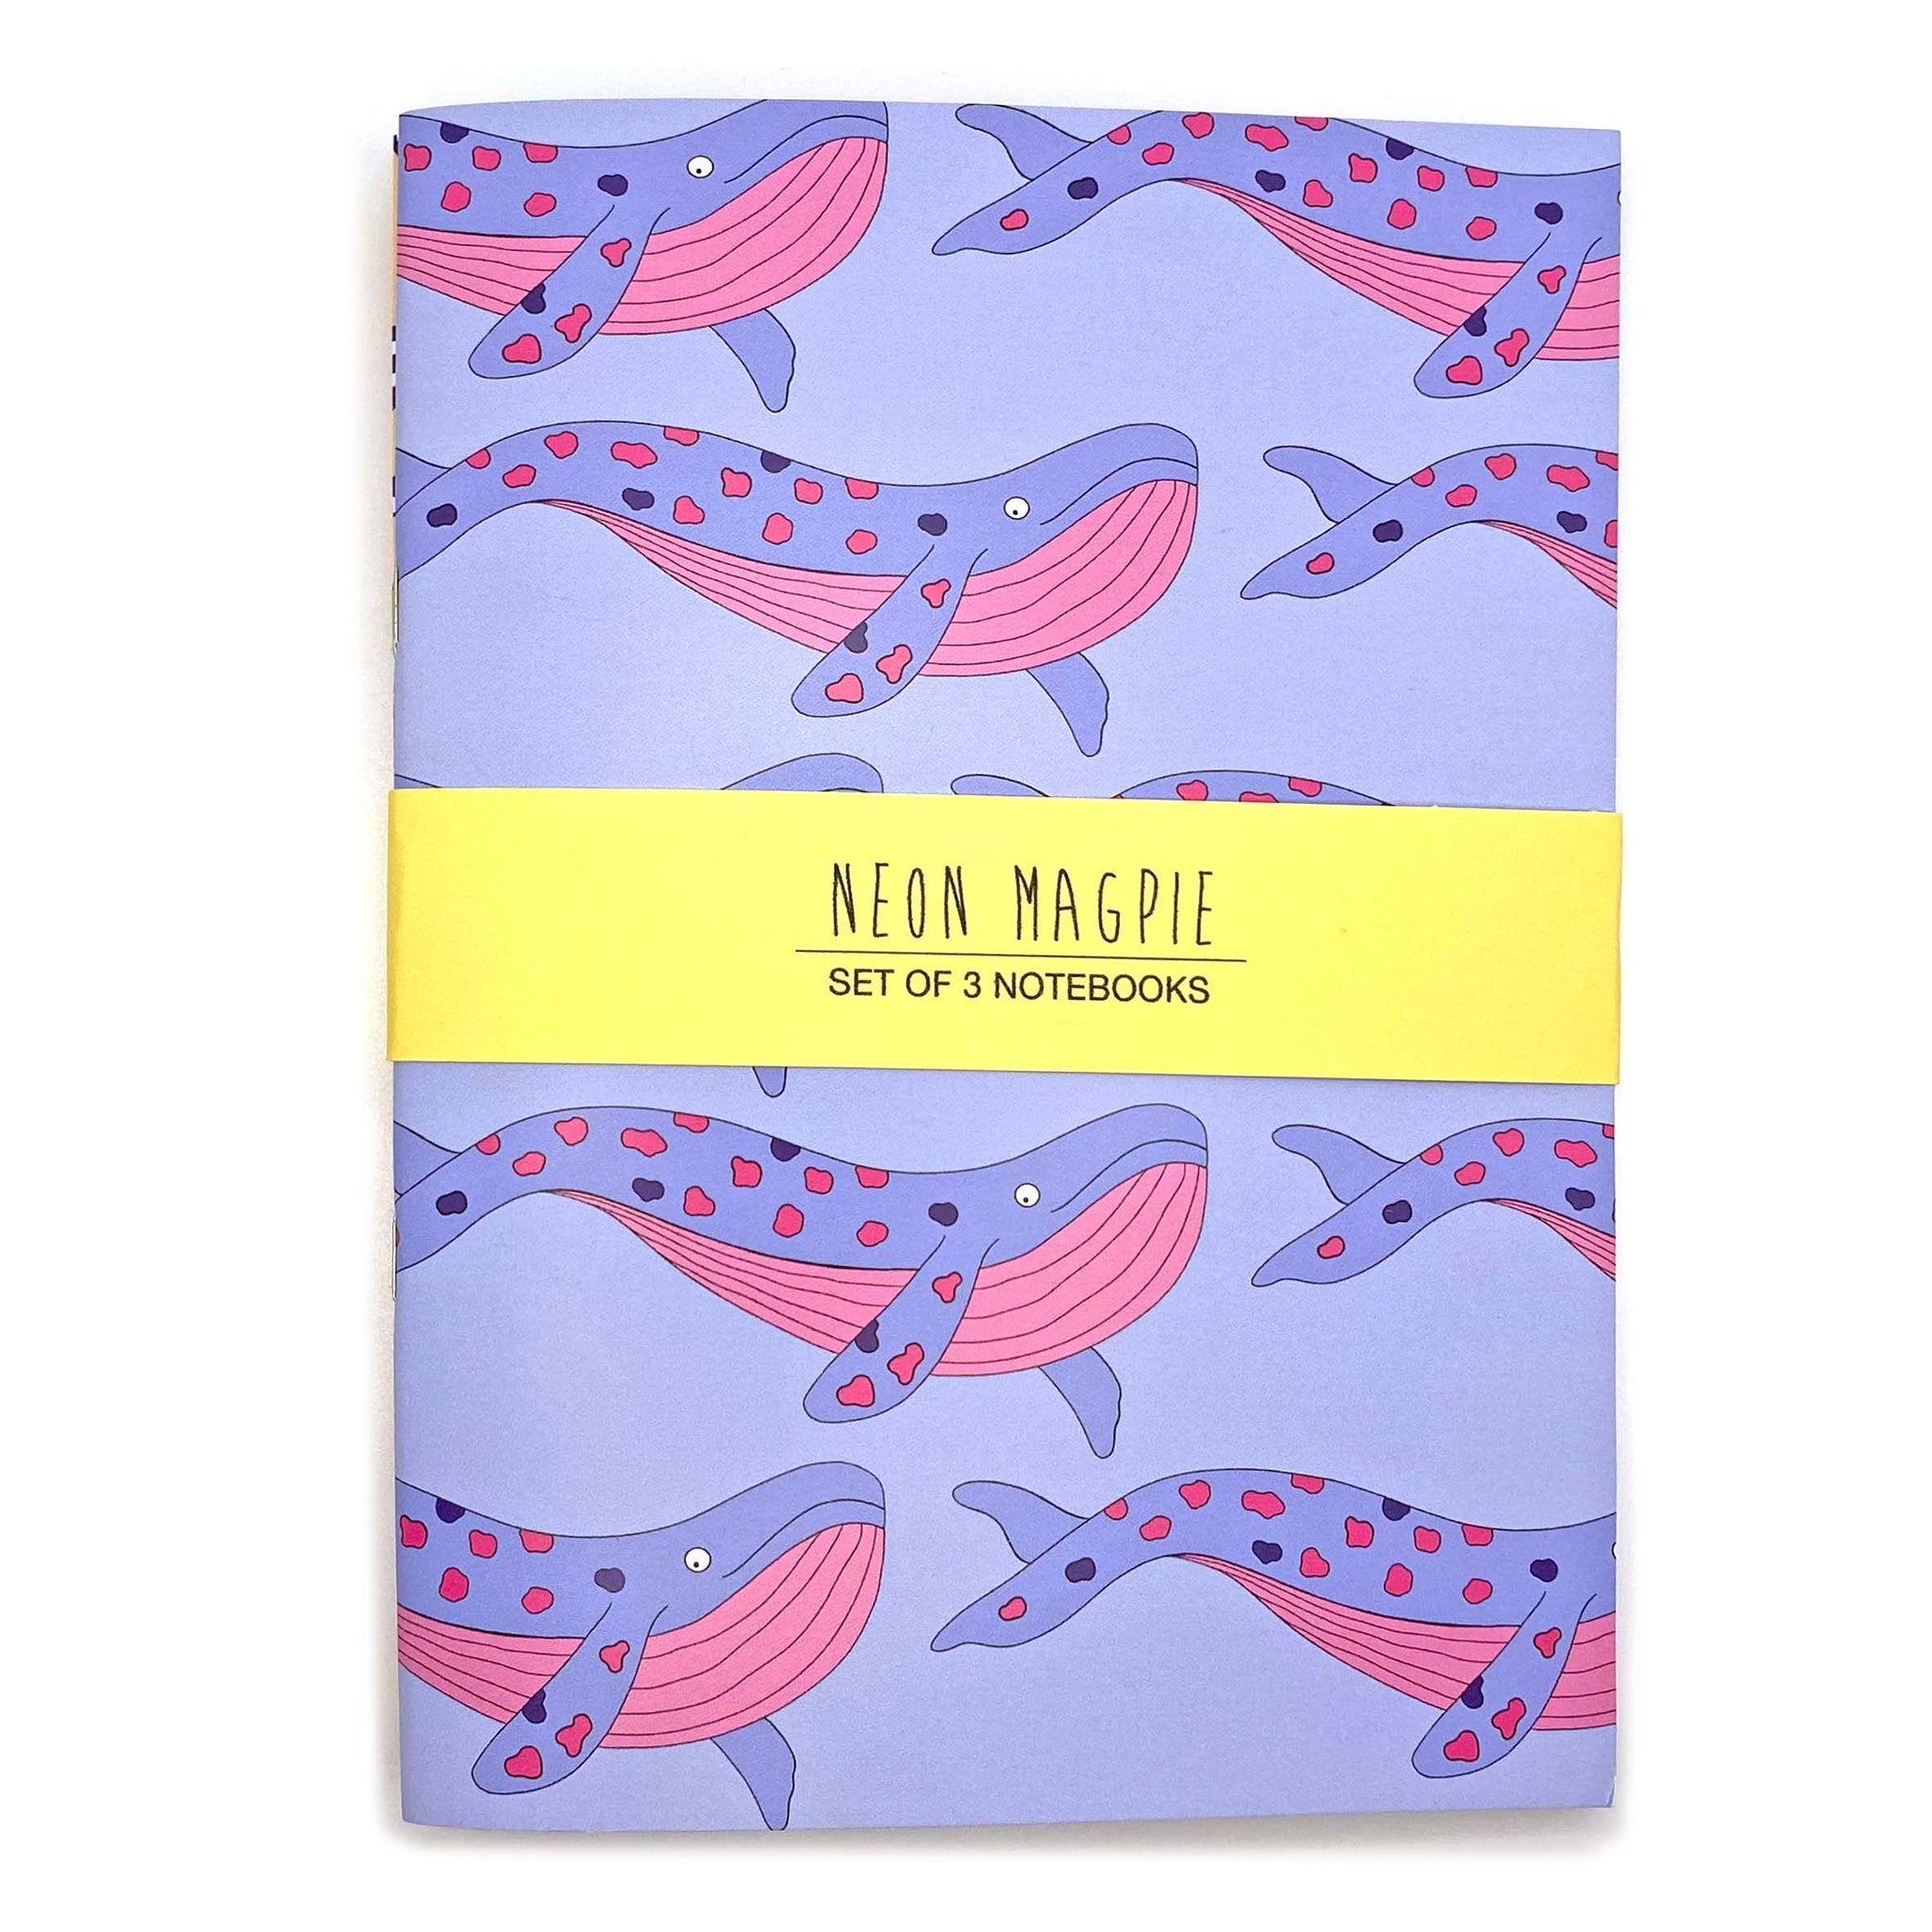 Ocean themed notebook set with whale illustrations